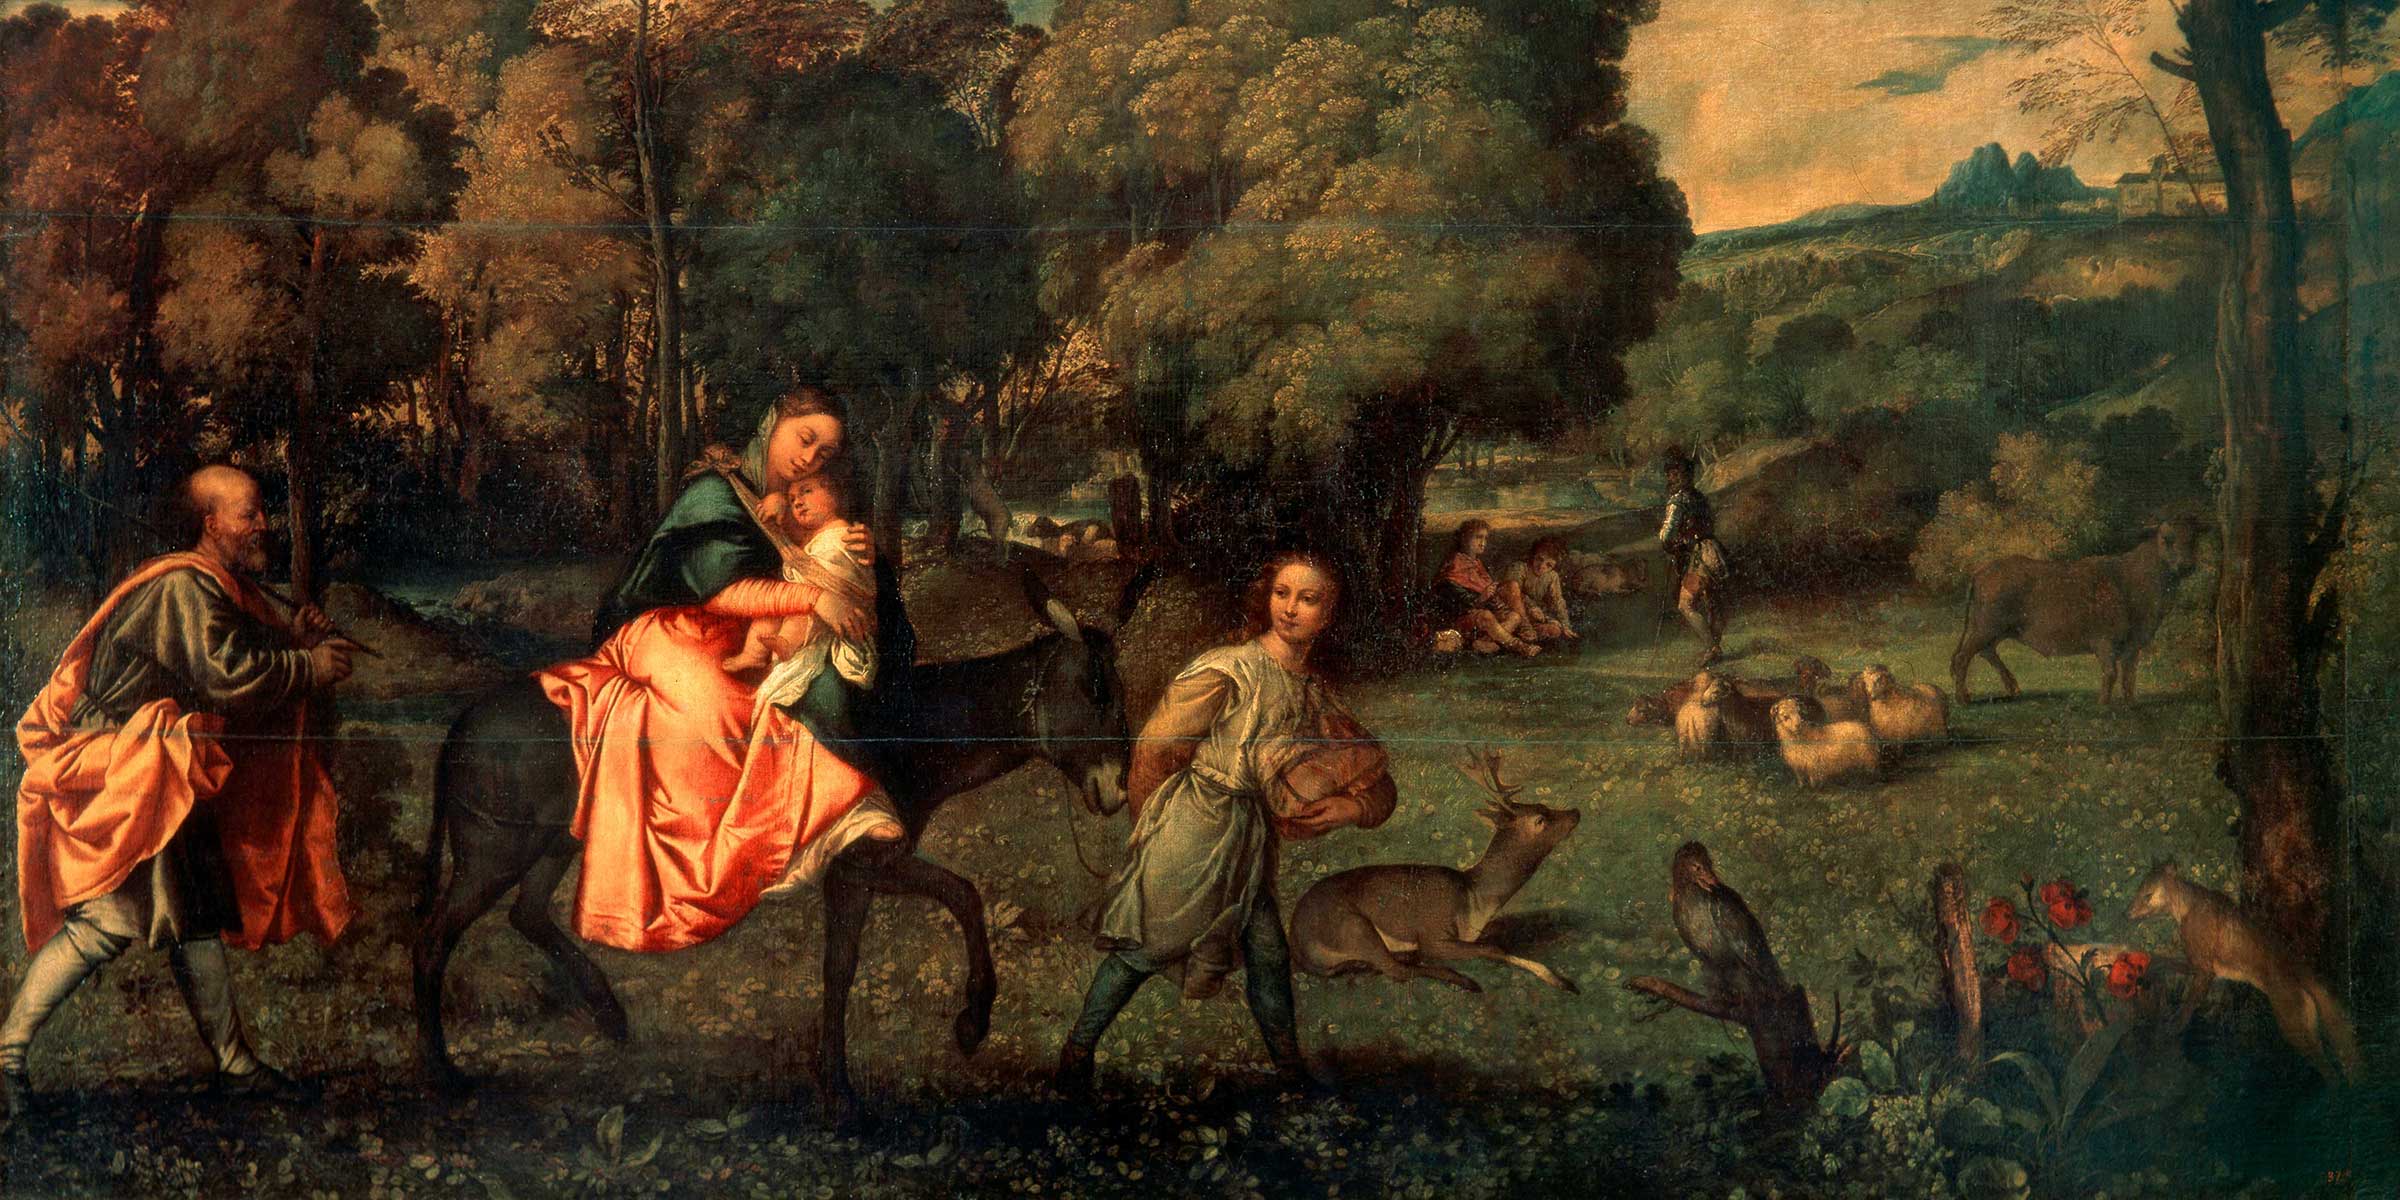 A woman and child on a horse led by a boy and followed by a man in a wooded area with animals